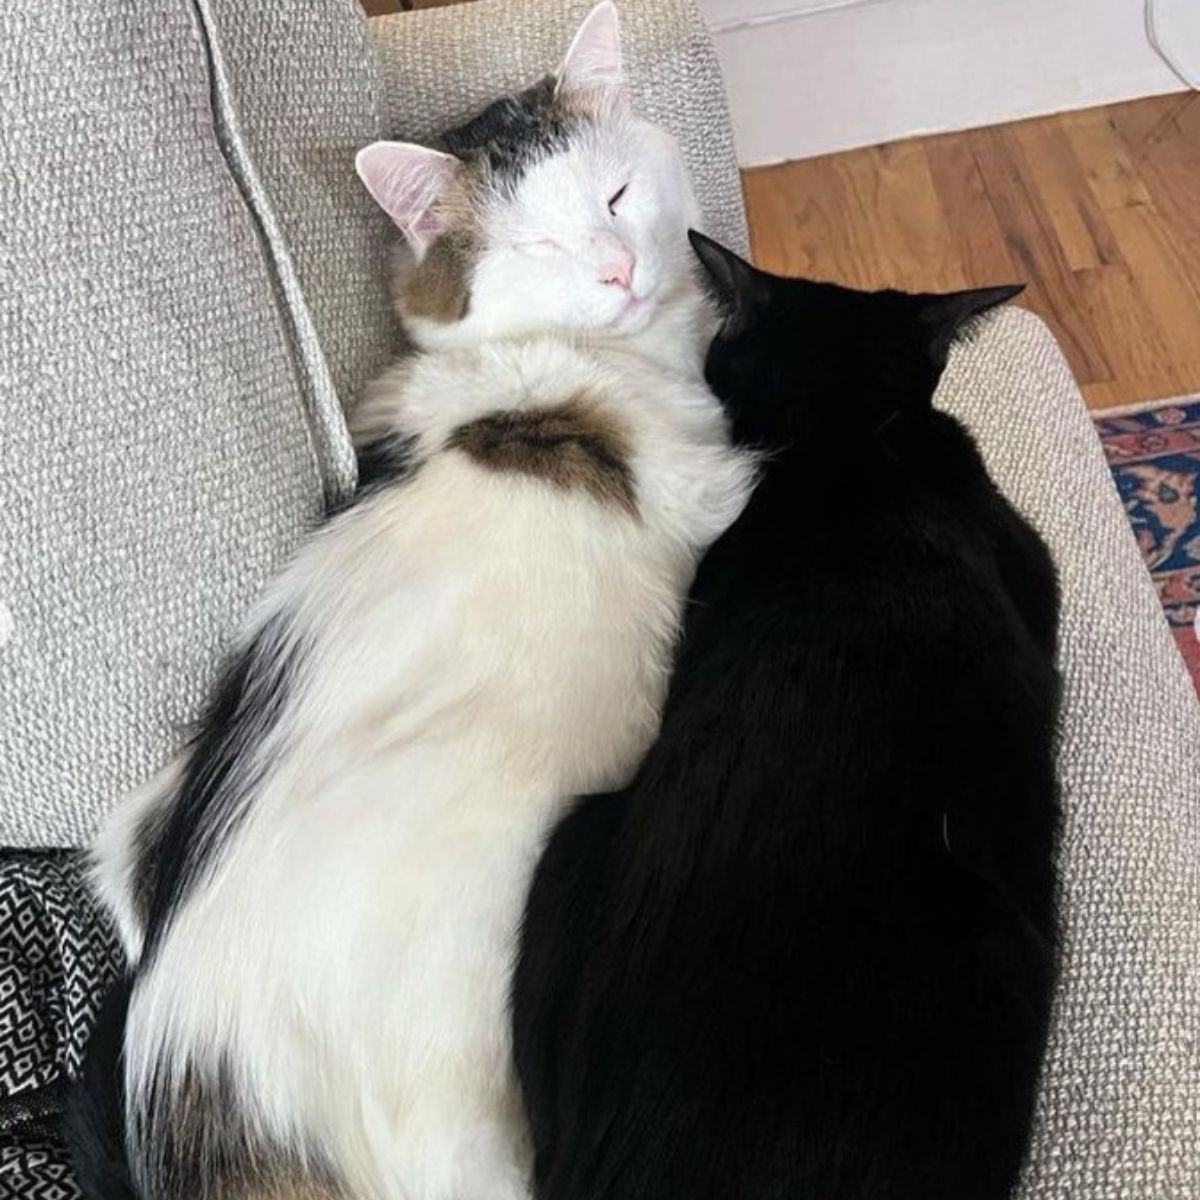 photo of two cats sleeping